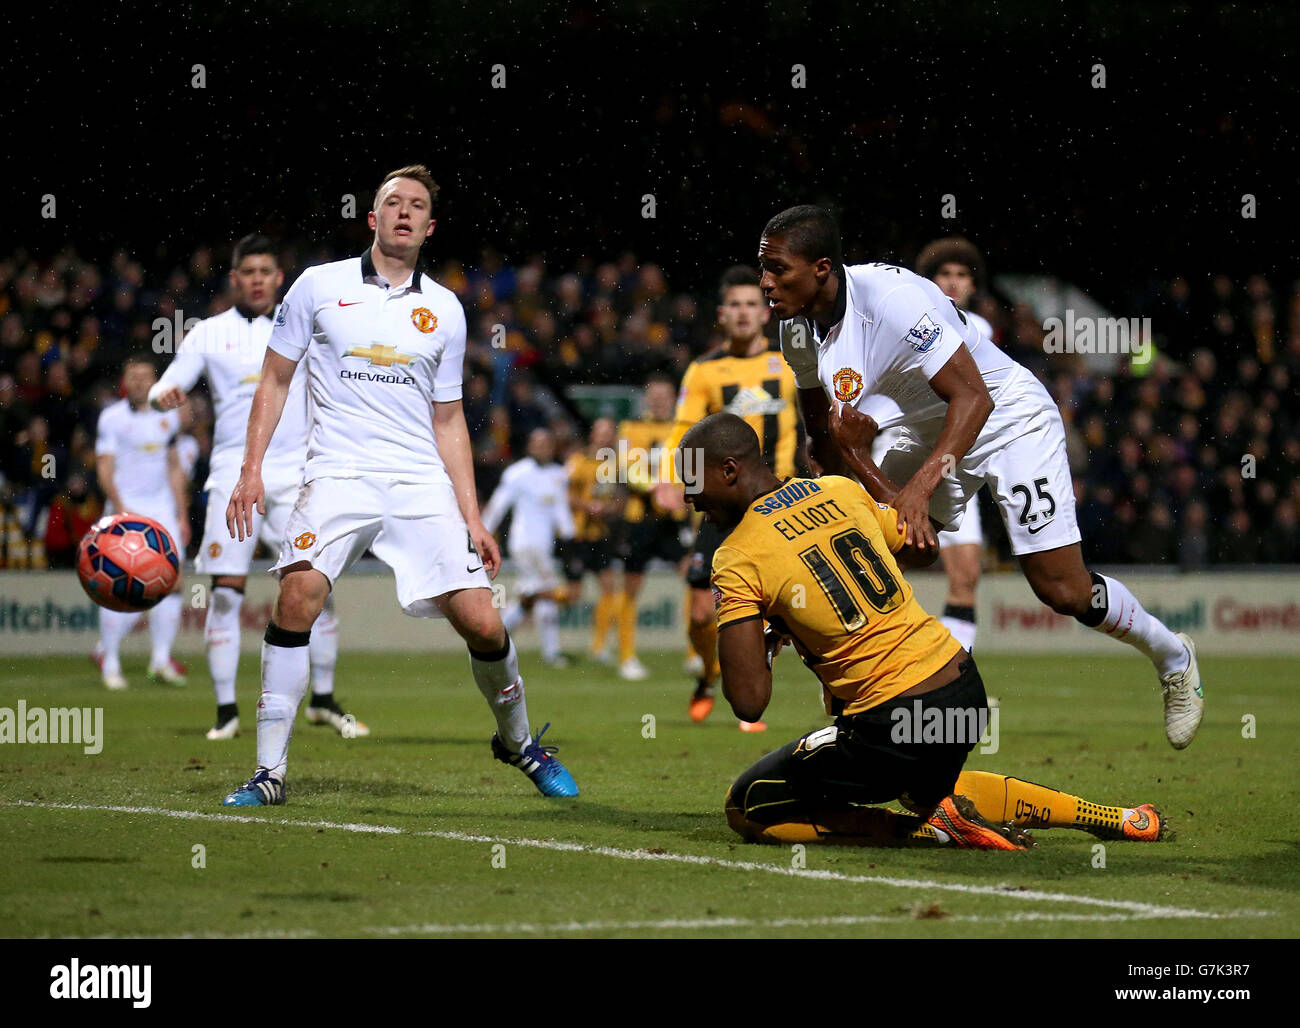 Cambridge United's Tom Elliot goes down in the area after battling for the ball with Manchester United's Antonio Valencia (right) Stock Photo